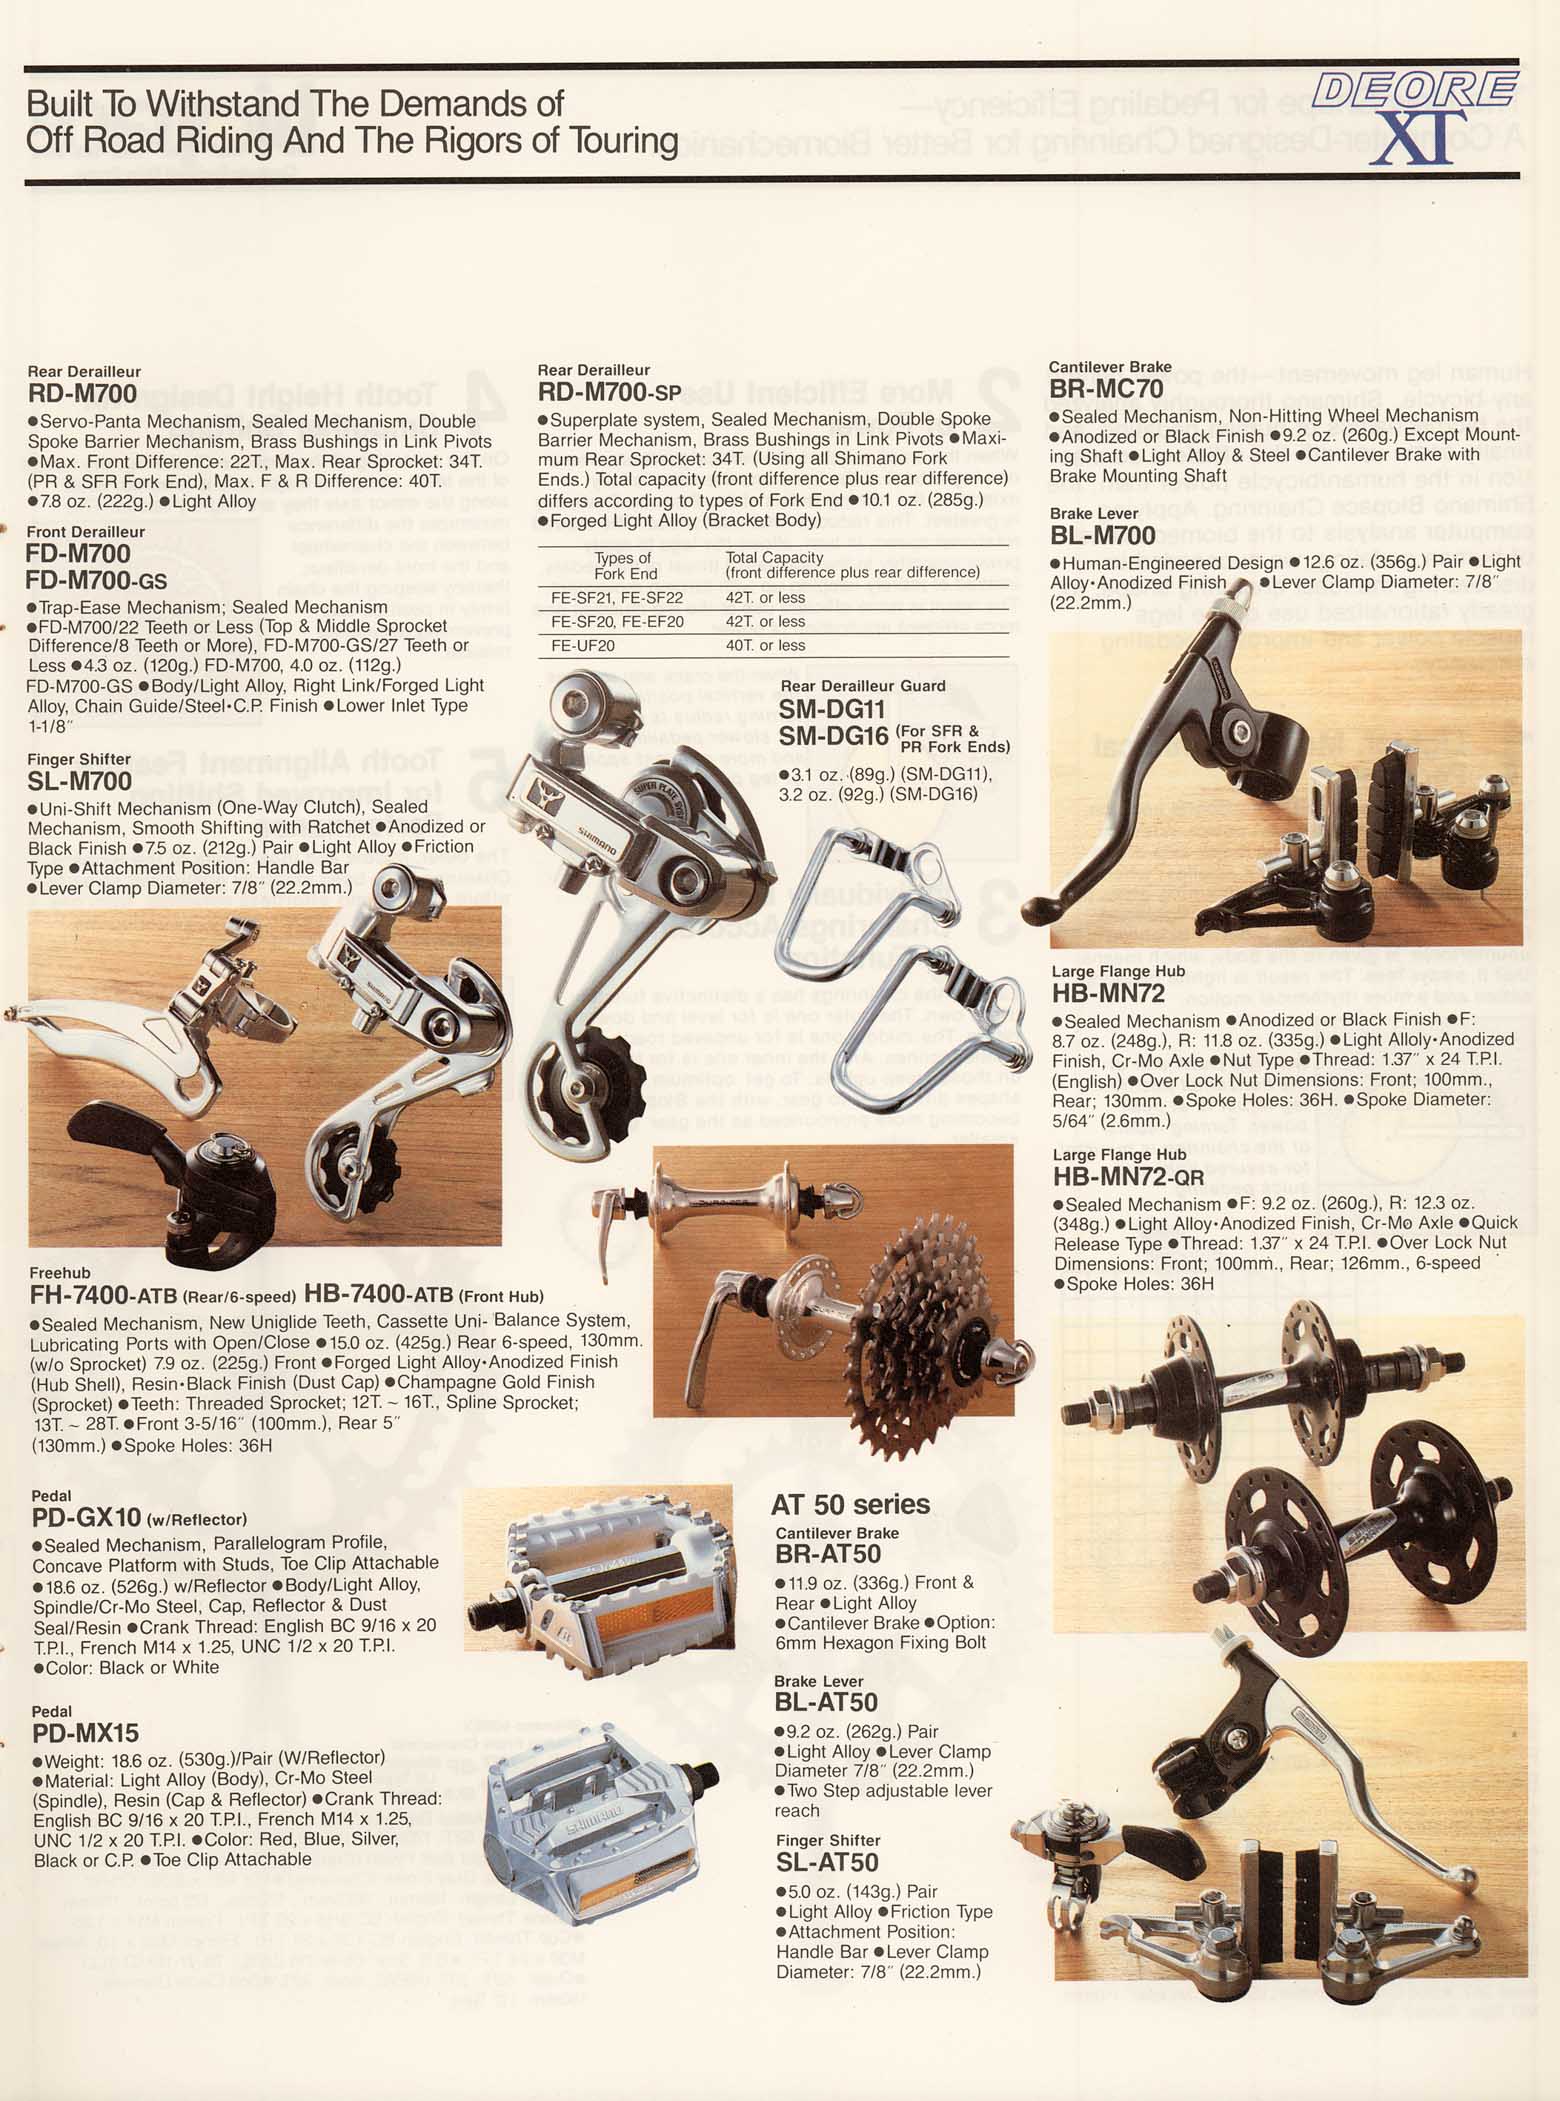 Shimano_Bicycle_System_Components_1986_scan_19_main_image.jpg